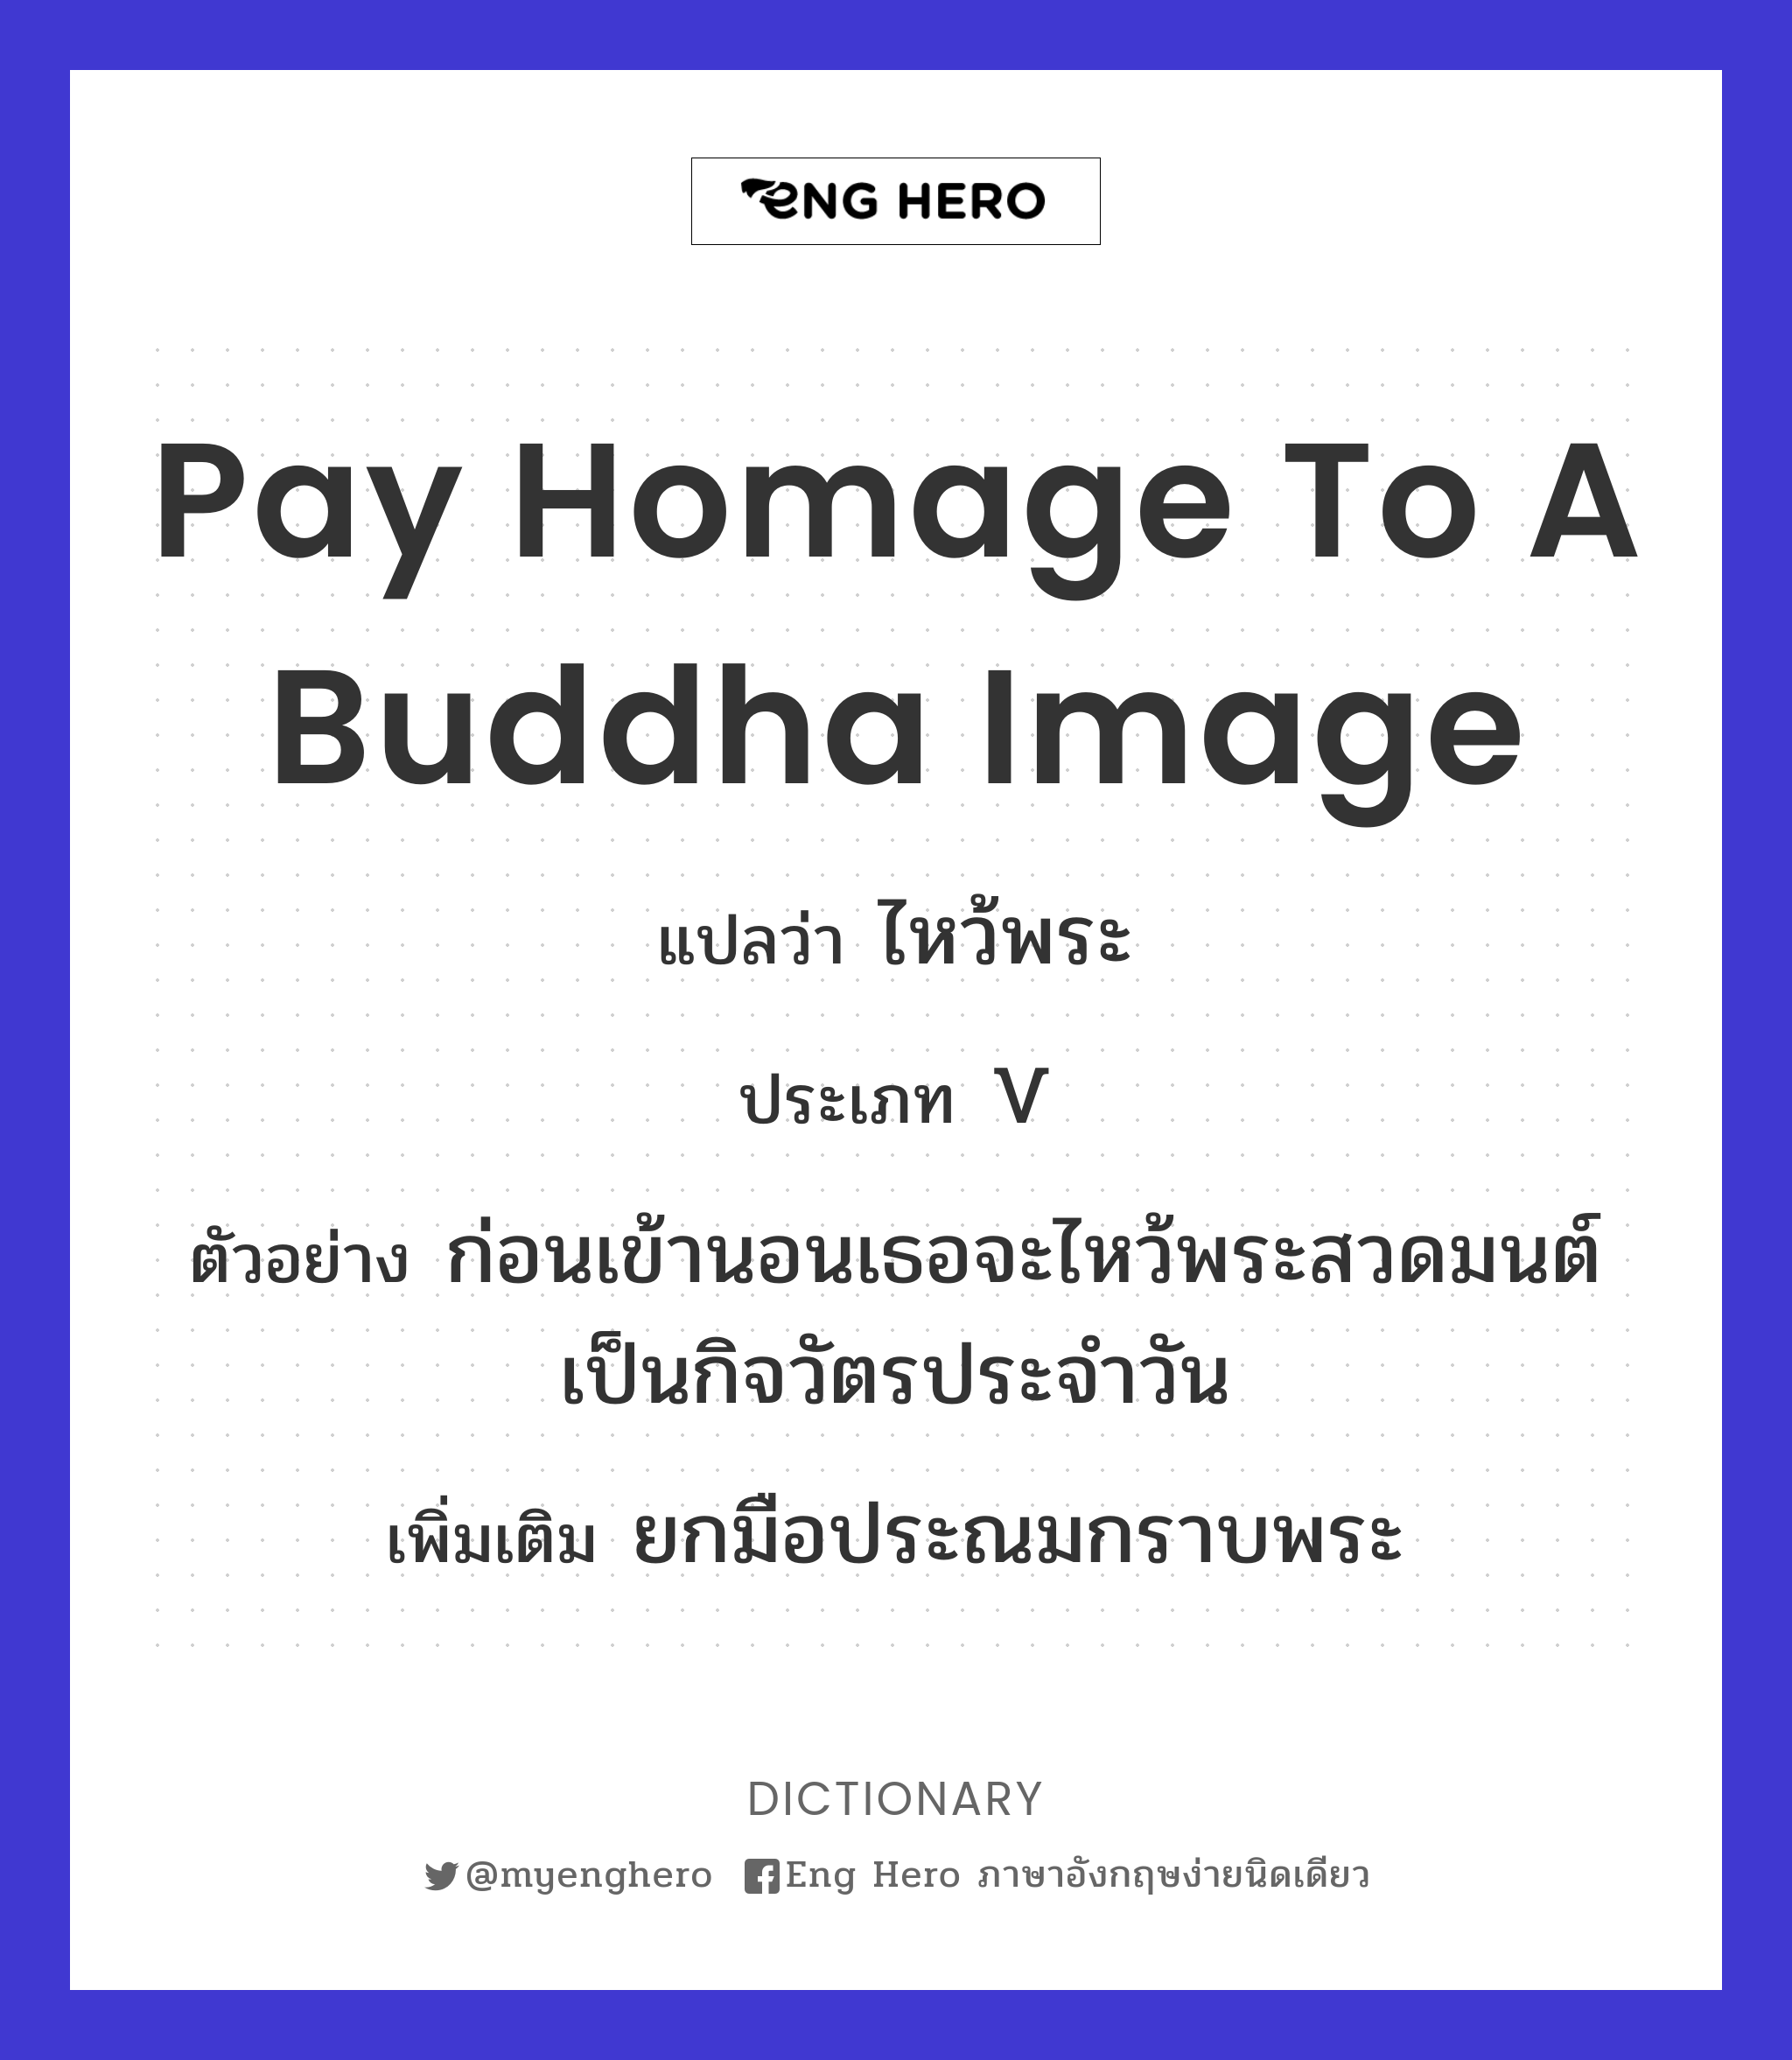 pay homage to a Buddha image